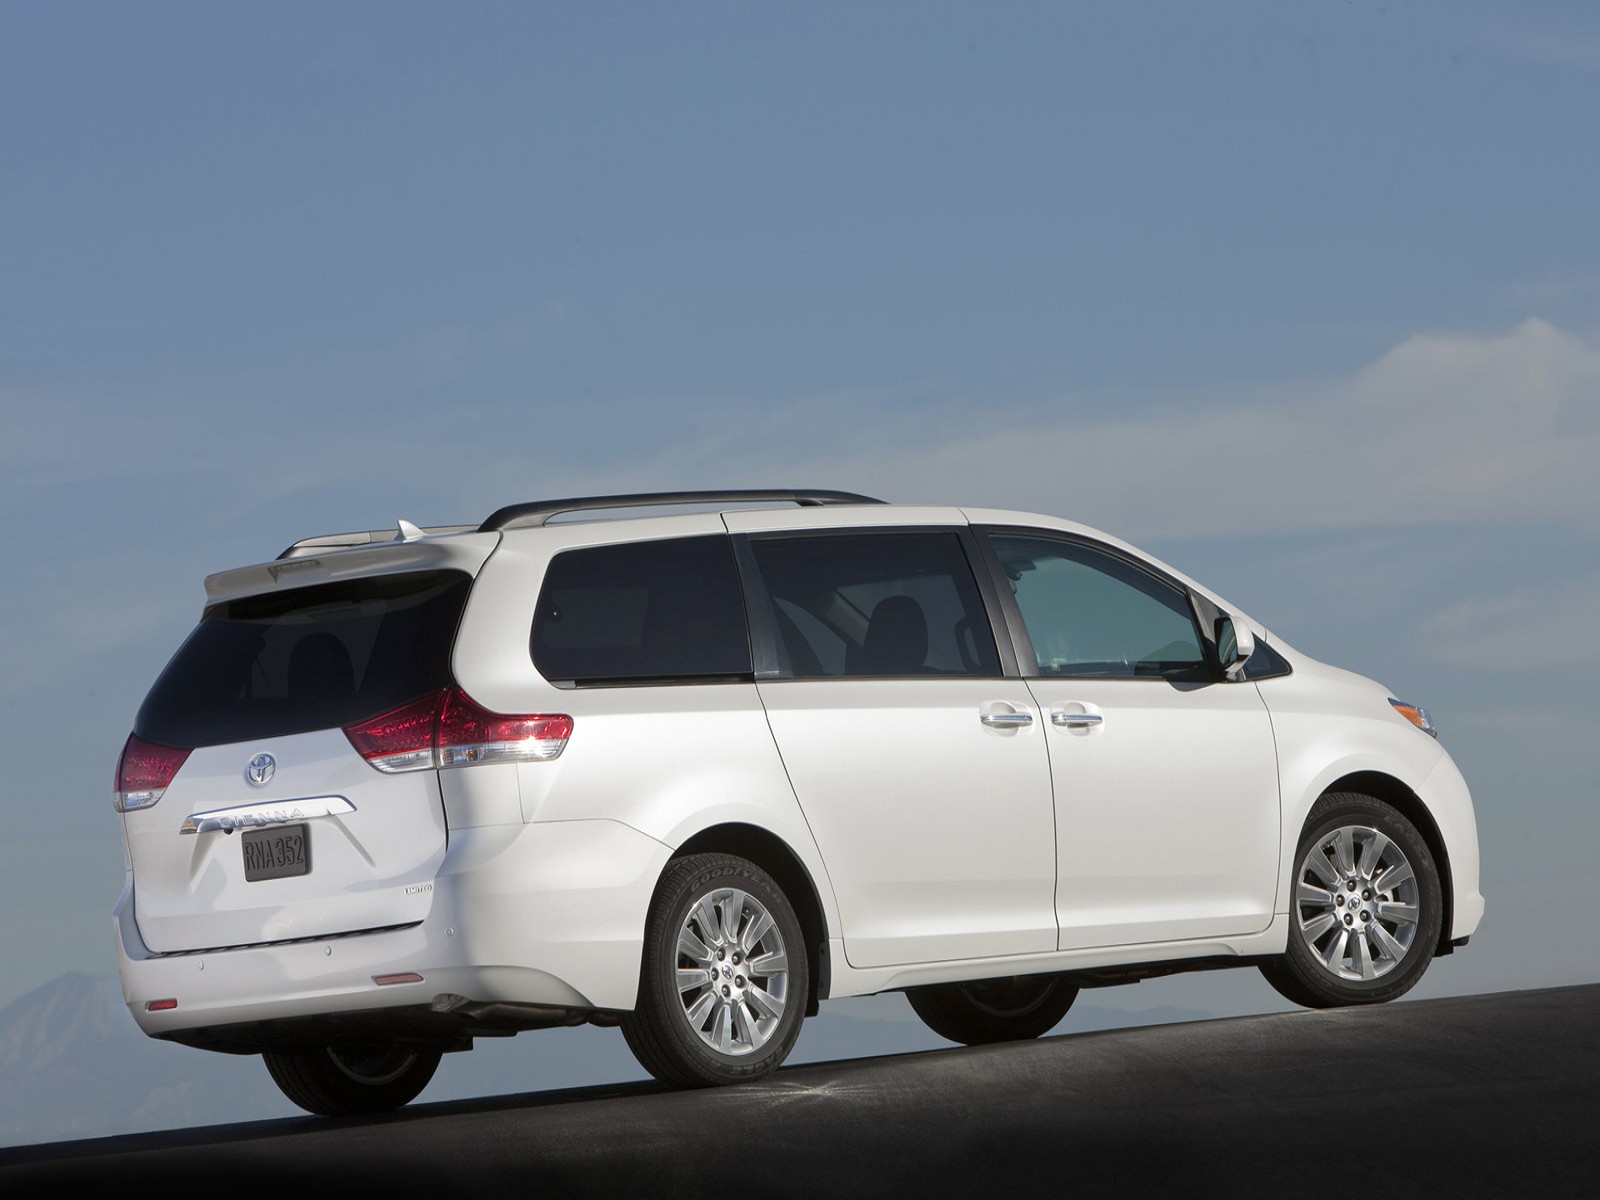 2011 Toyota Sienna Awd Towing Capacity